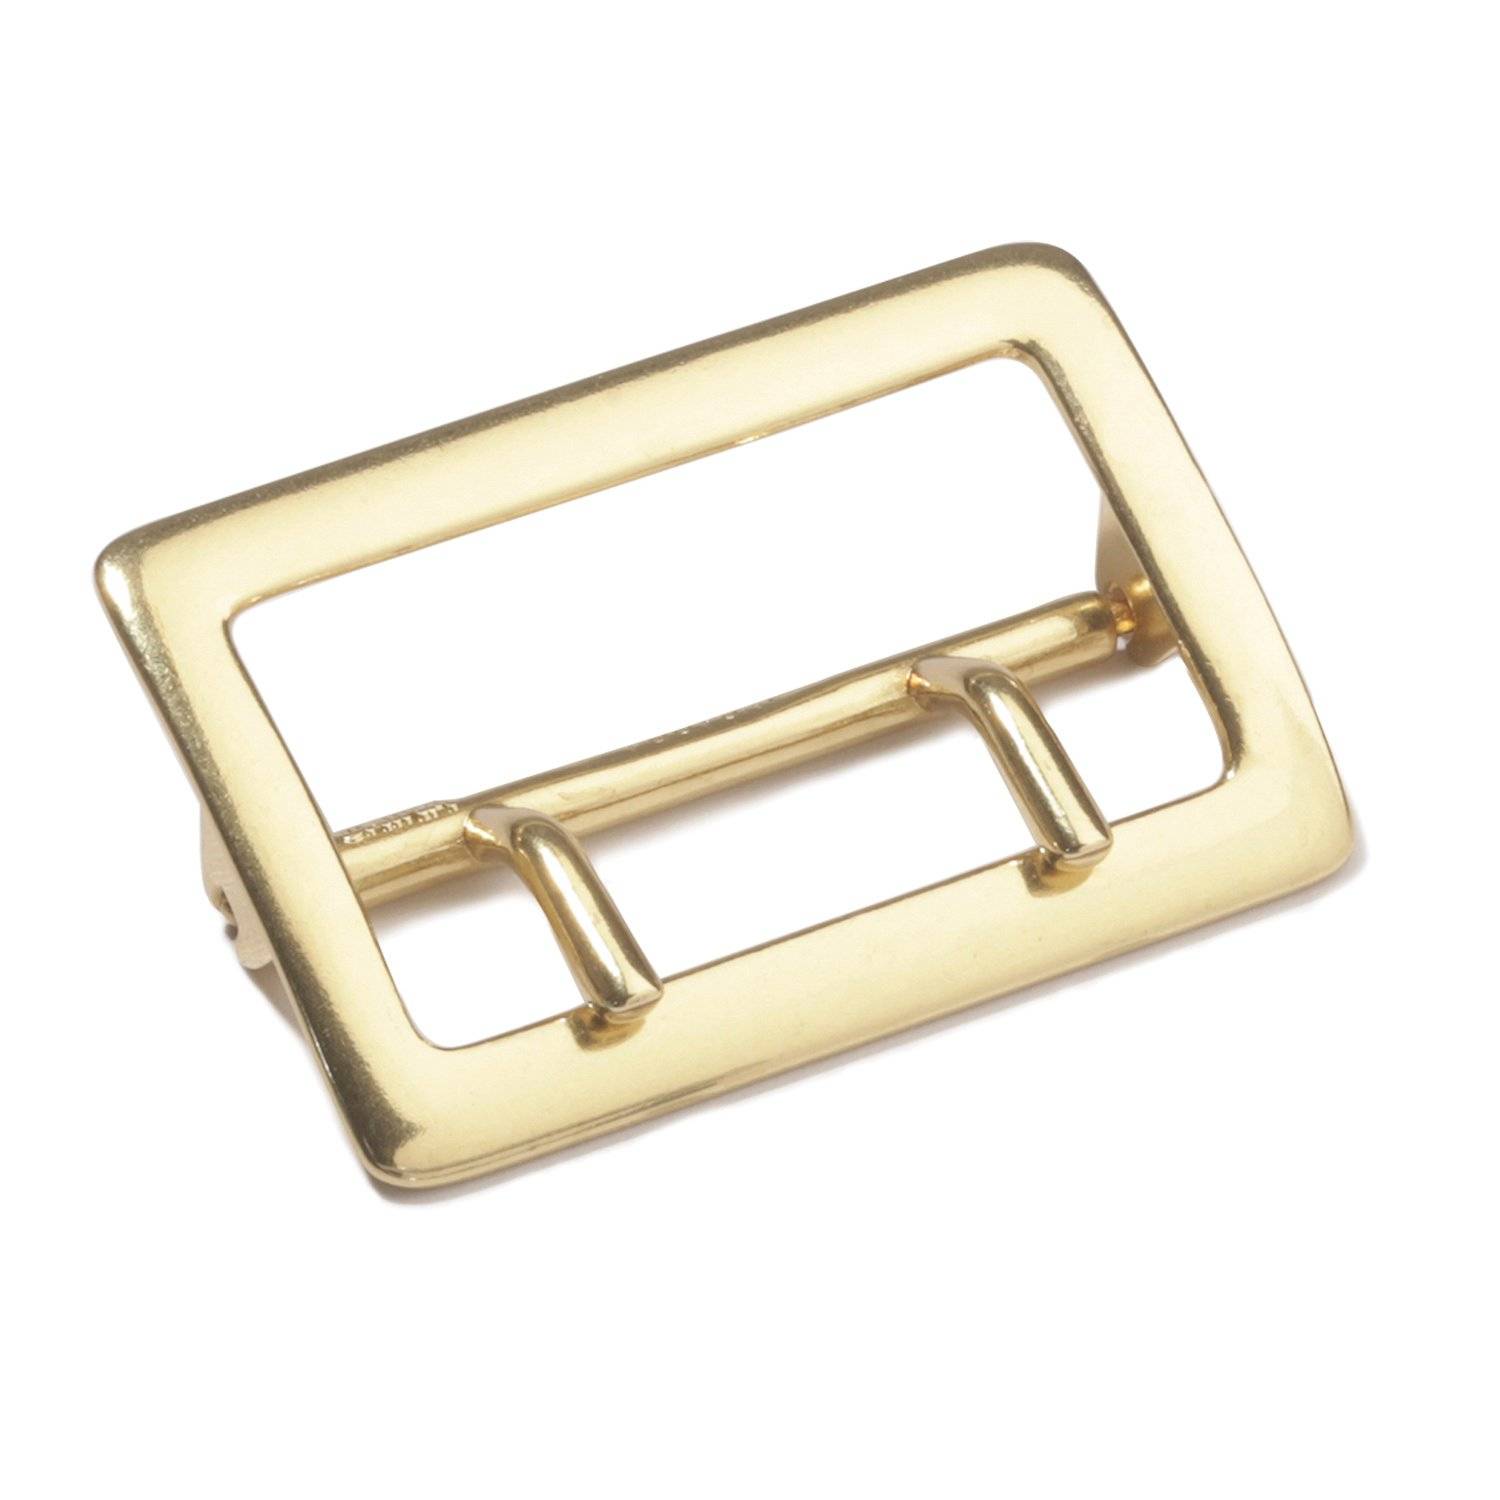 Triple K Solid Polished Brass Sam Browne Replacement Buckle/ 2 1/4" Duty Belts 